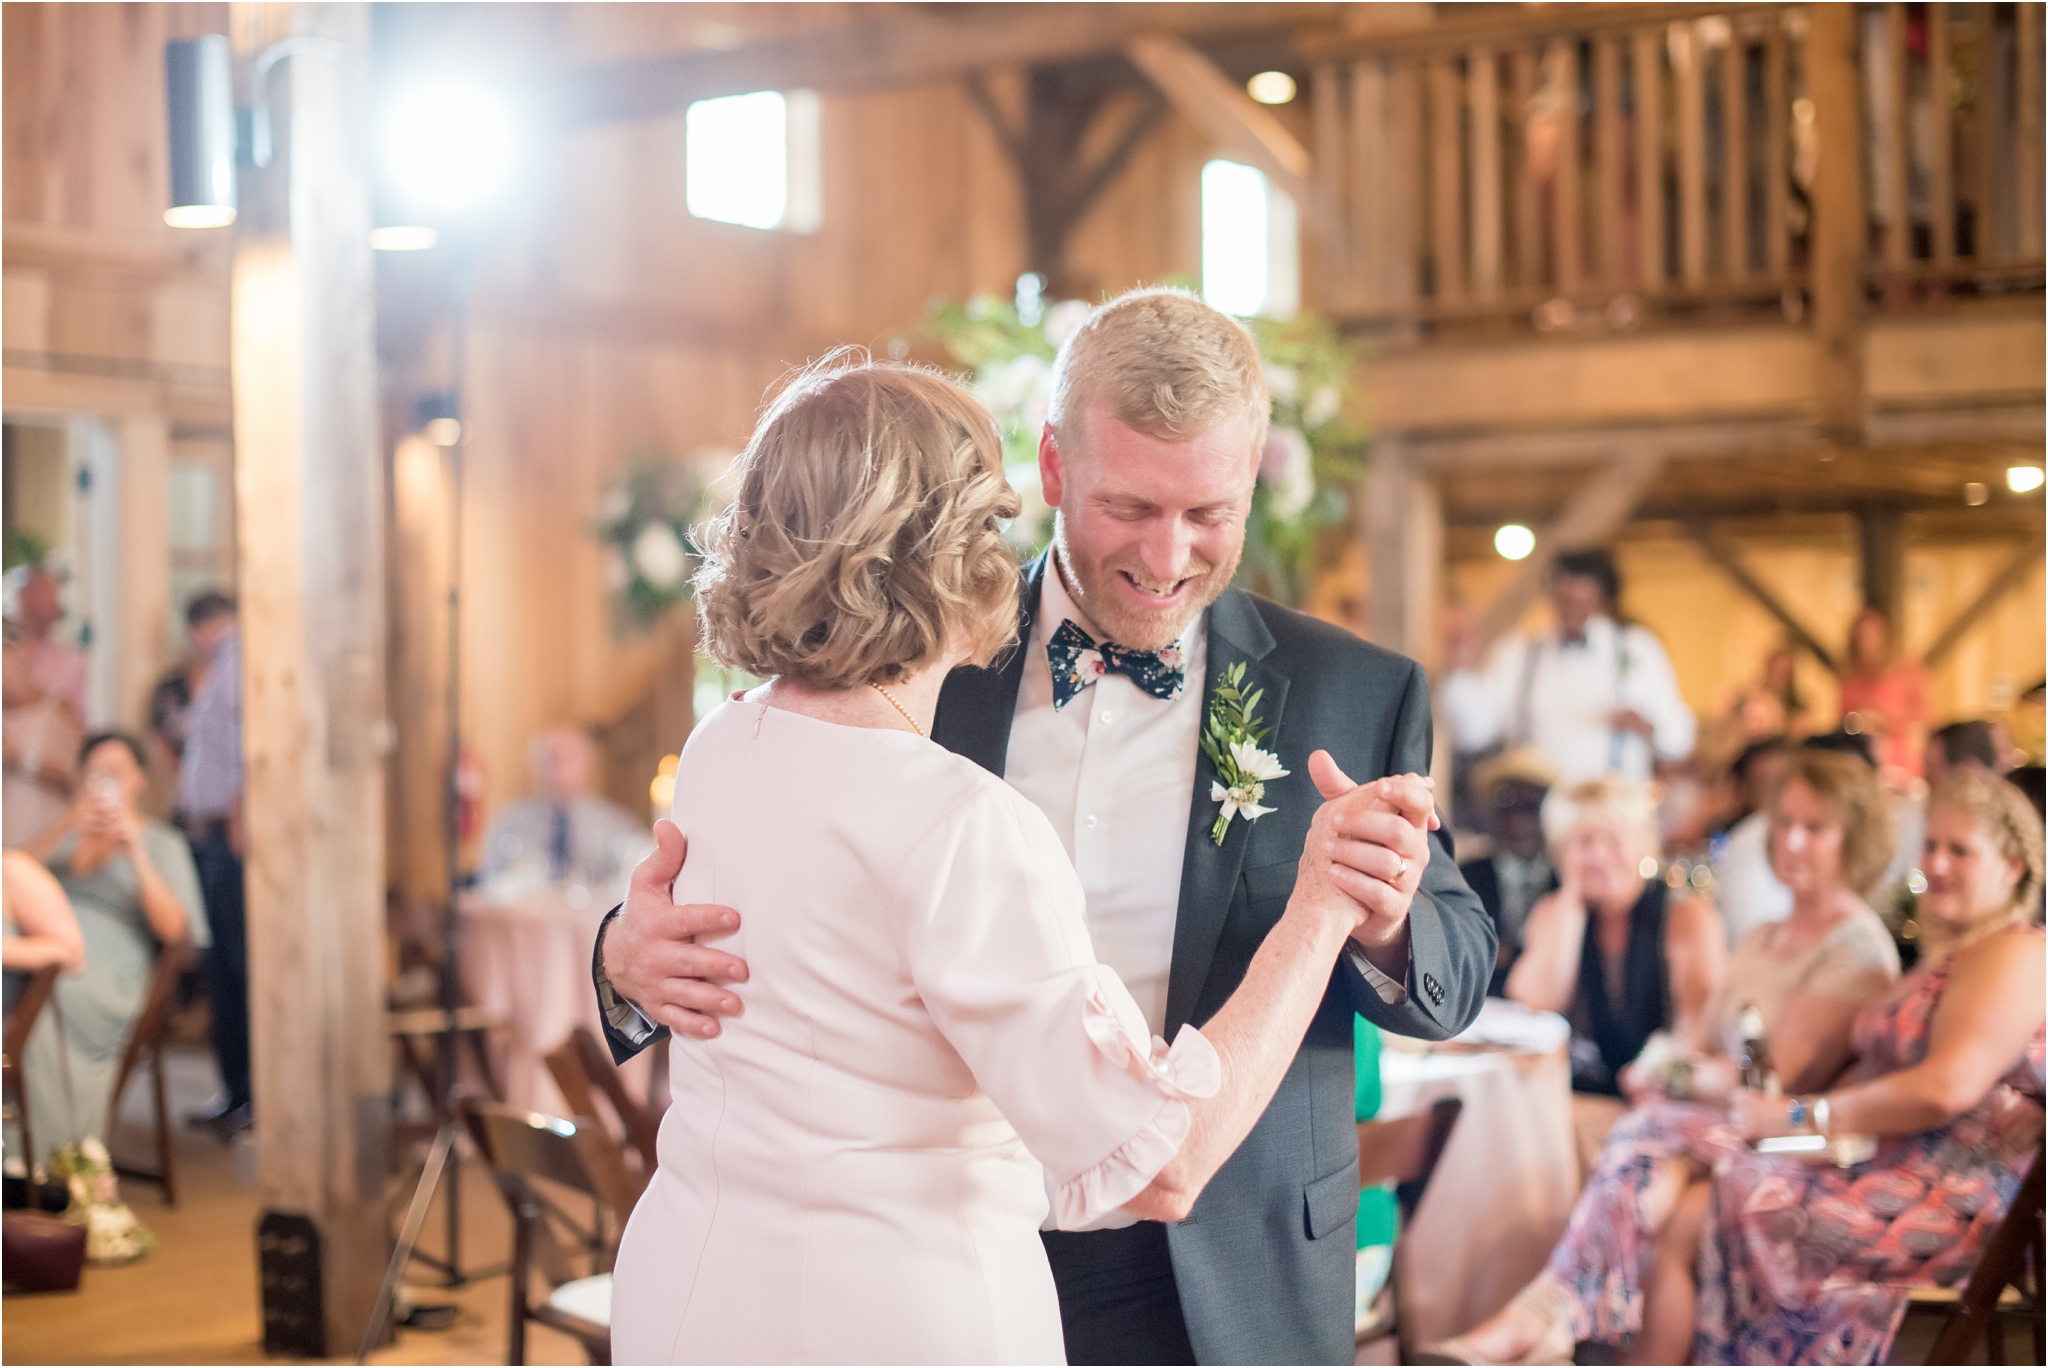 Lindley Farmstead at Chatham Hills | Sarah and Rachel Wedding Photographers | Westfield, Indiana wedding | mother son reception dance